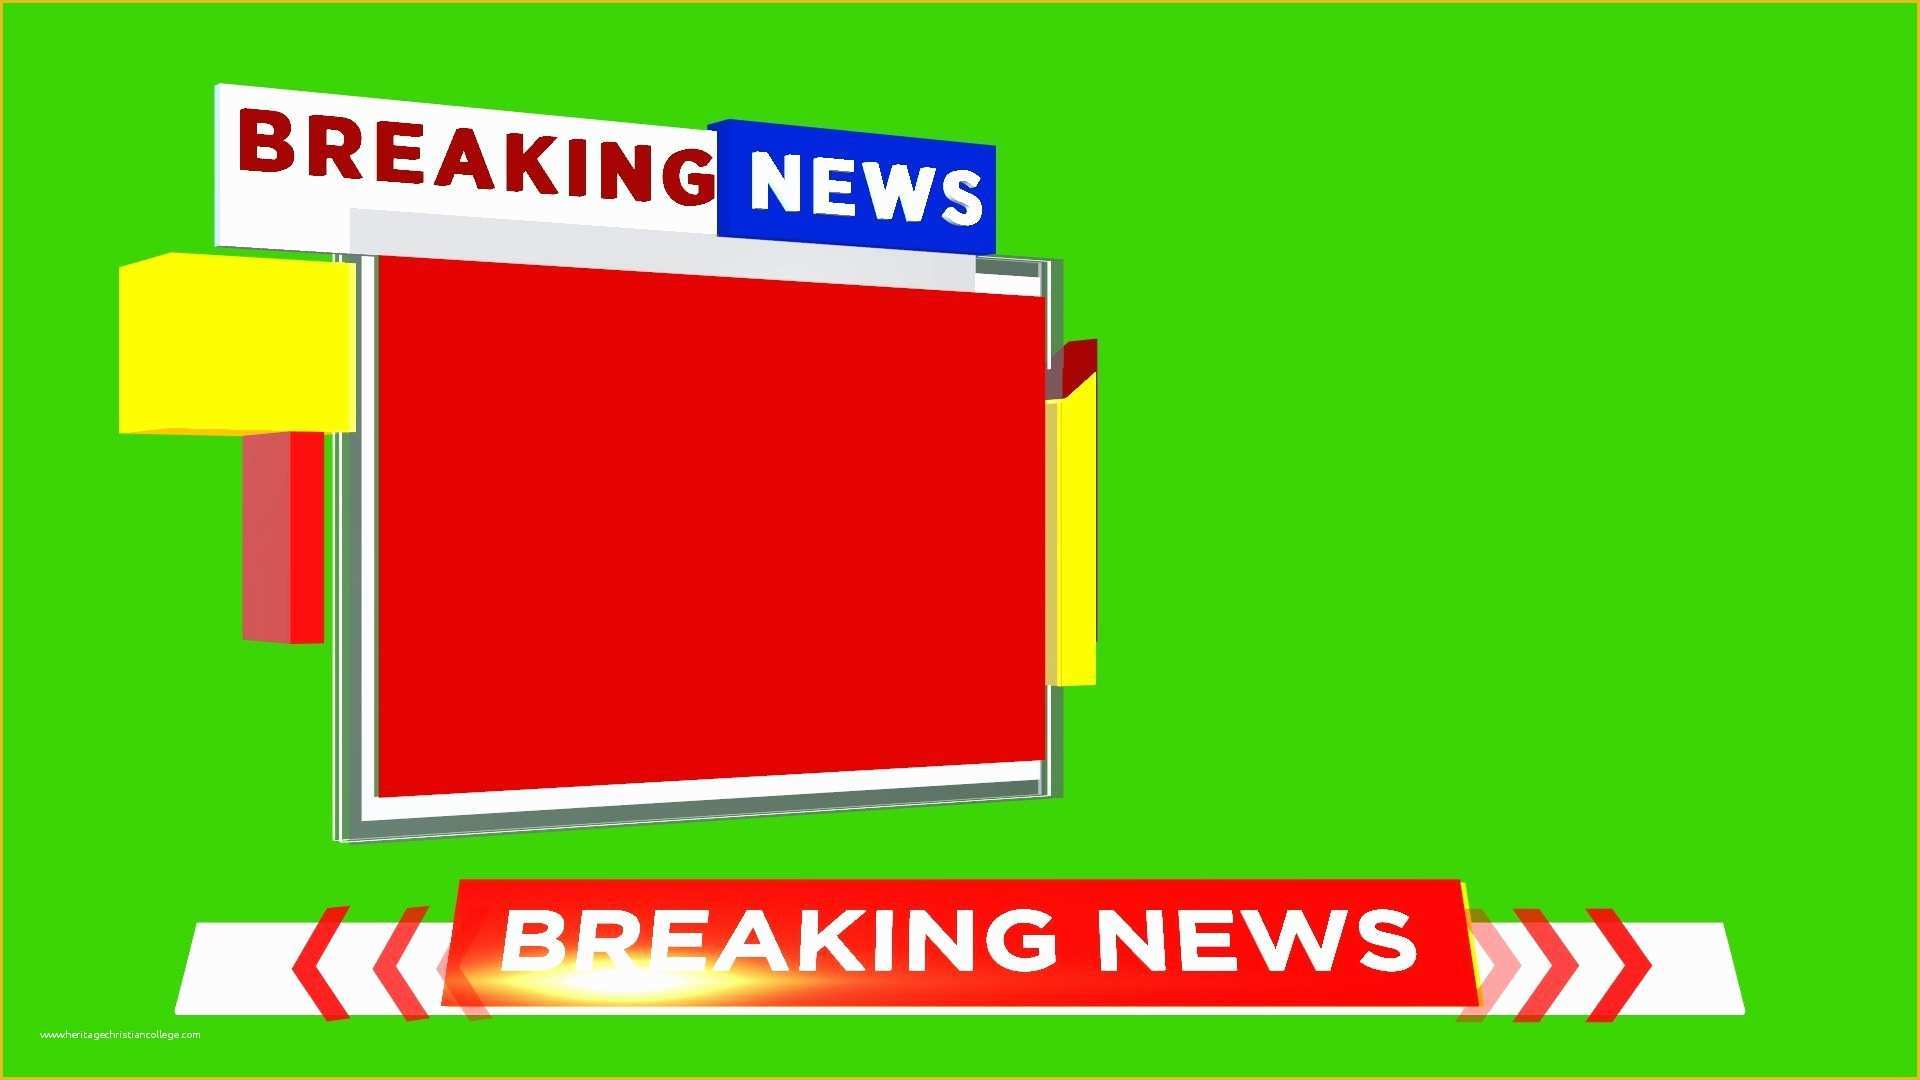 Template Bumper after Effect Free Of Breaking News Green Screen Archives Mtc Tutorials